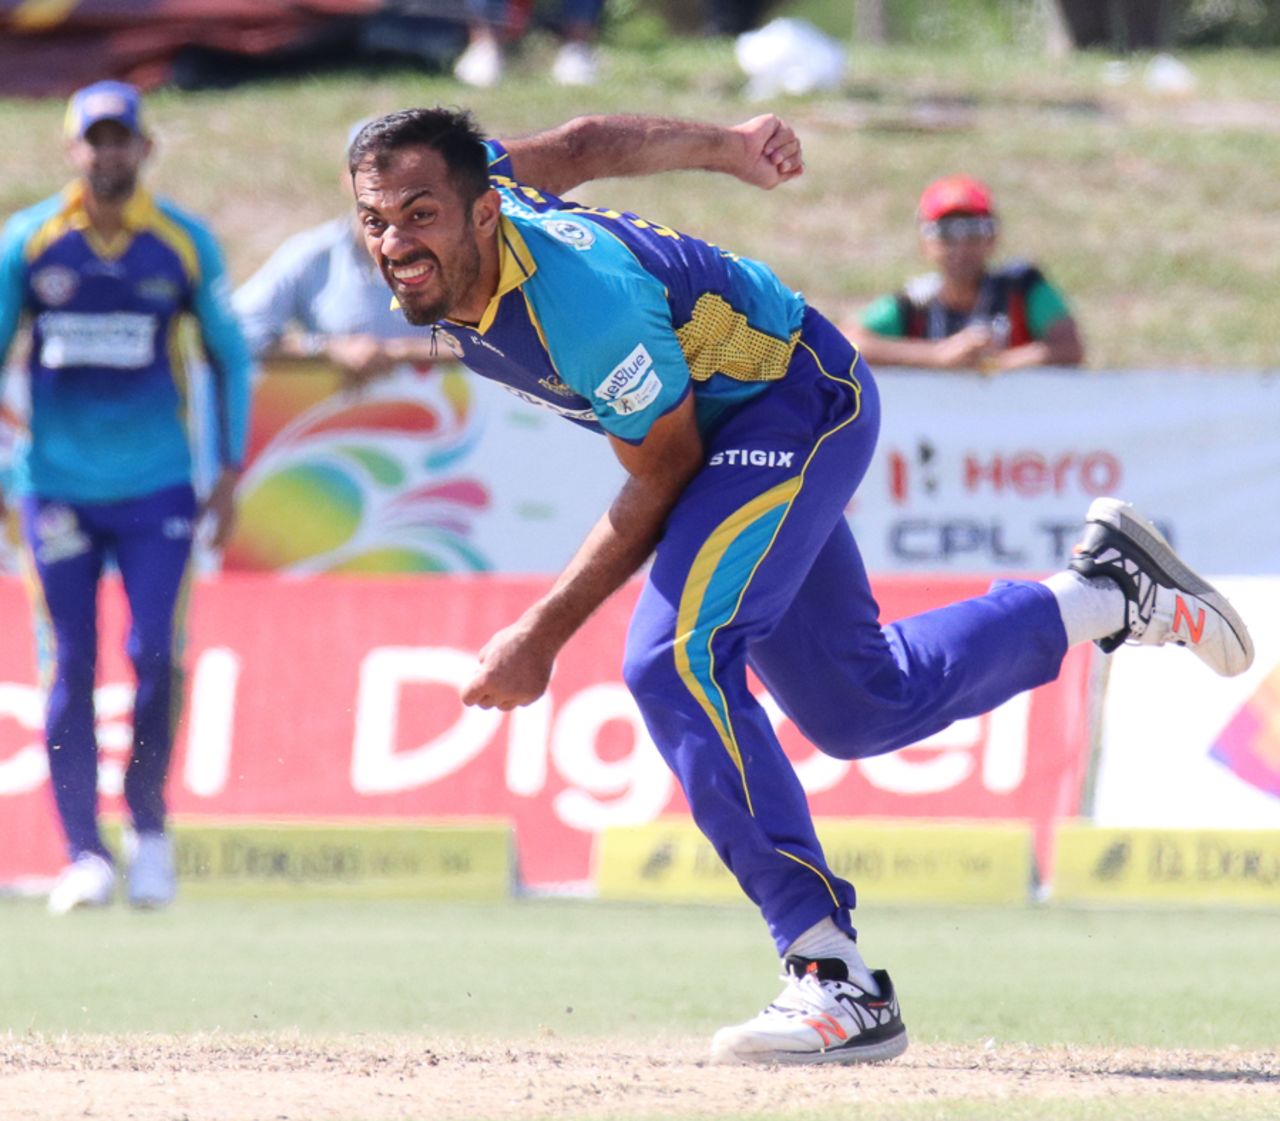 Wahab Riaz took 3 for 32 including a triple-wicket maiden in the 11th over, Barbados Tridents v Jamaica Tallawahs, Lauderhill, CPL, August 6, 2017